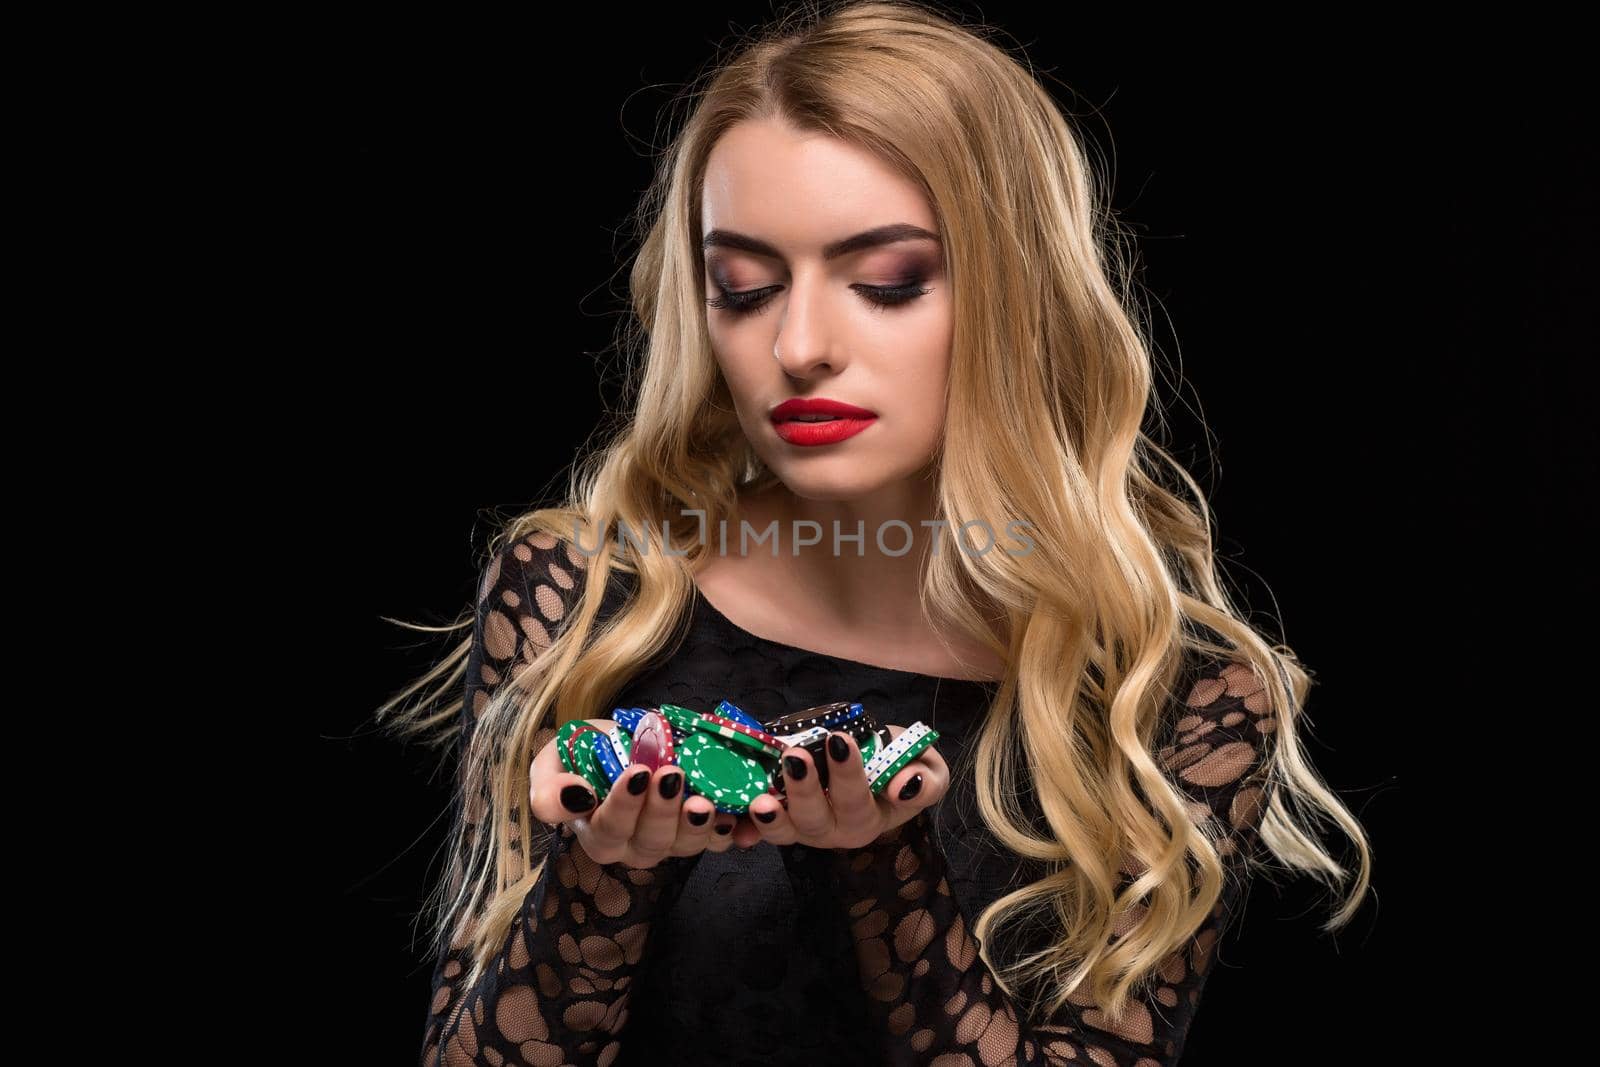 Elegant blonde in a black dress, casino player holding a handful of chips on black background by nazarovsergey